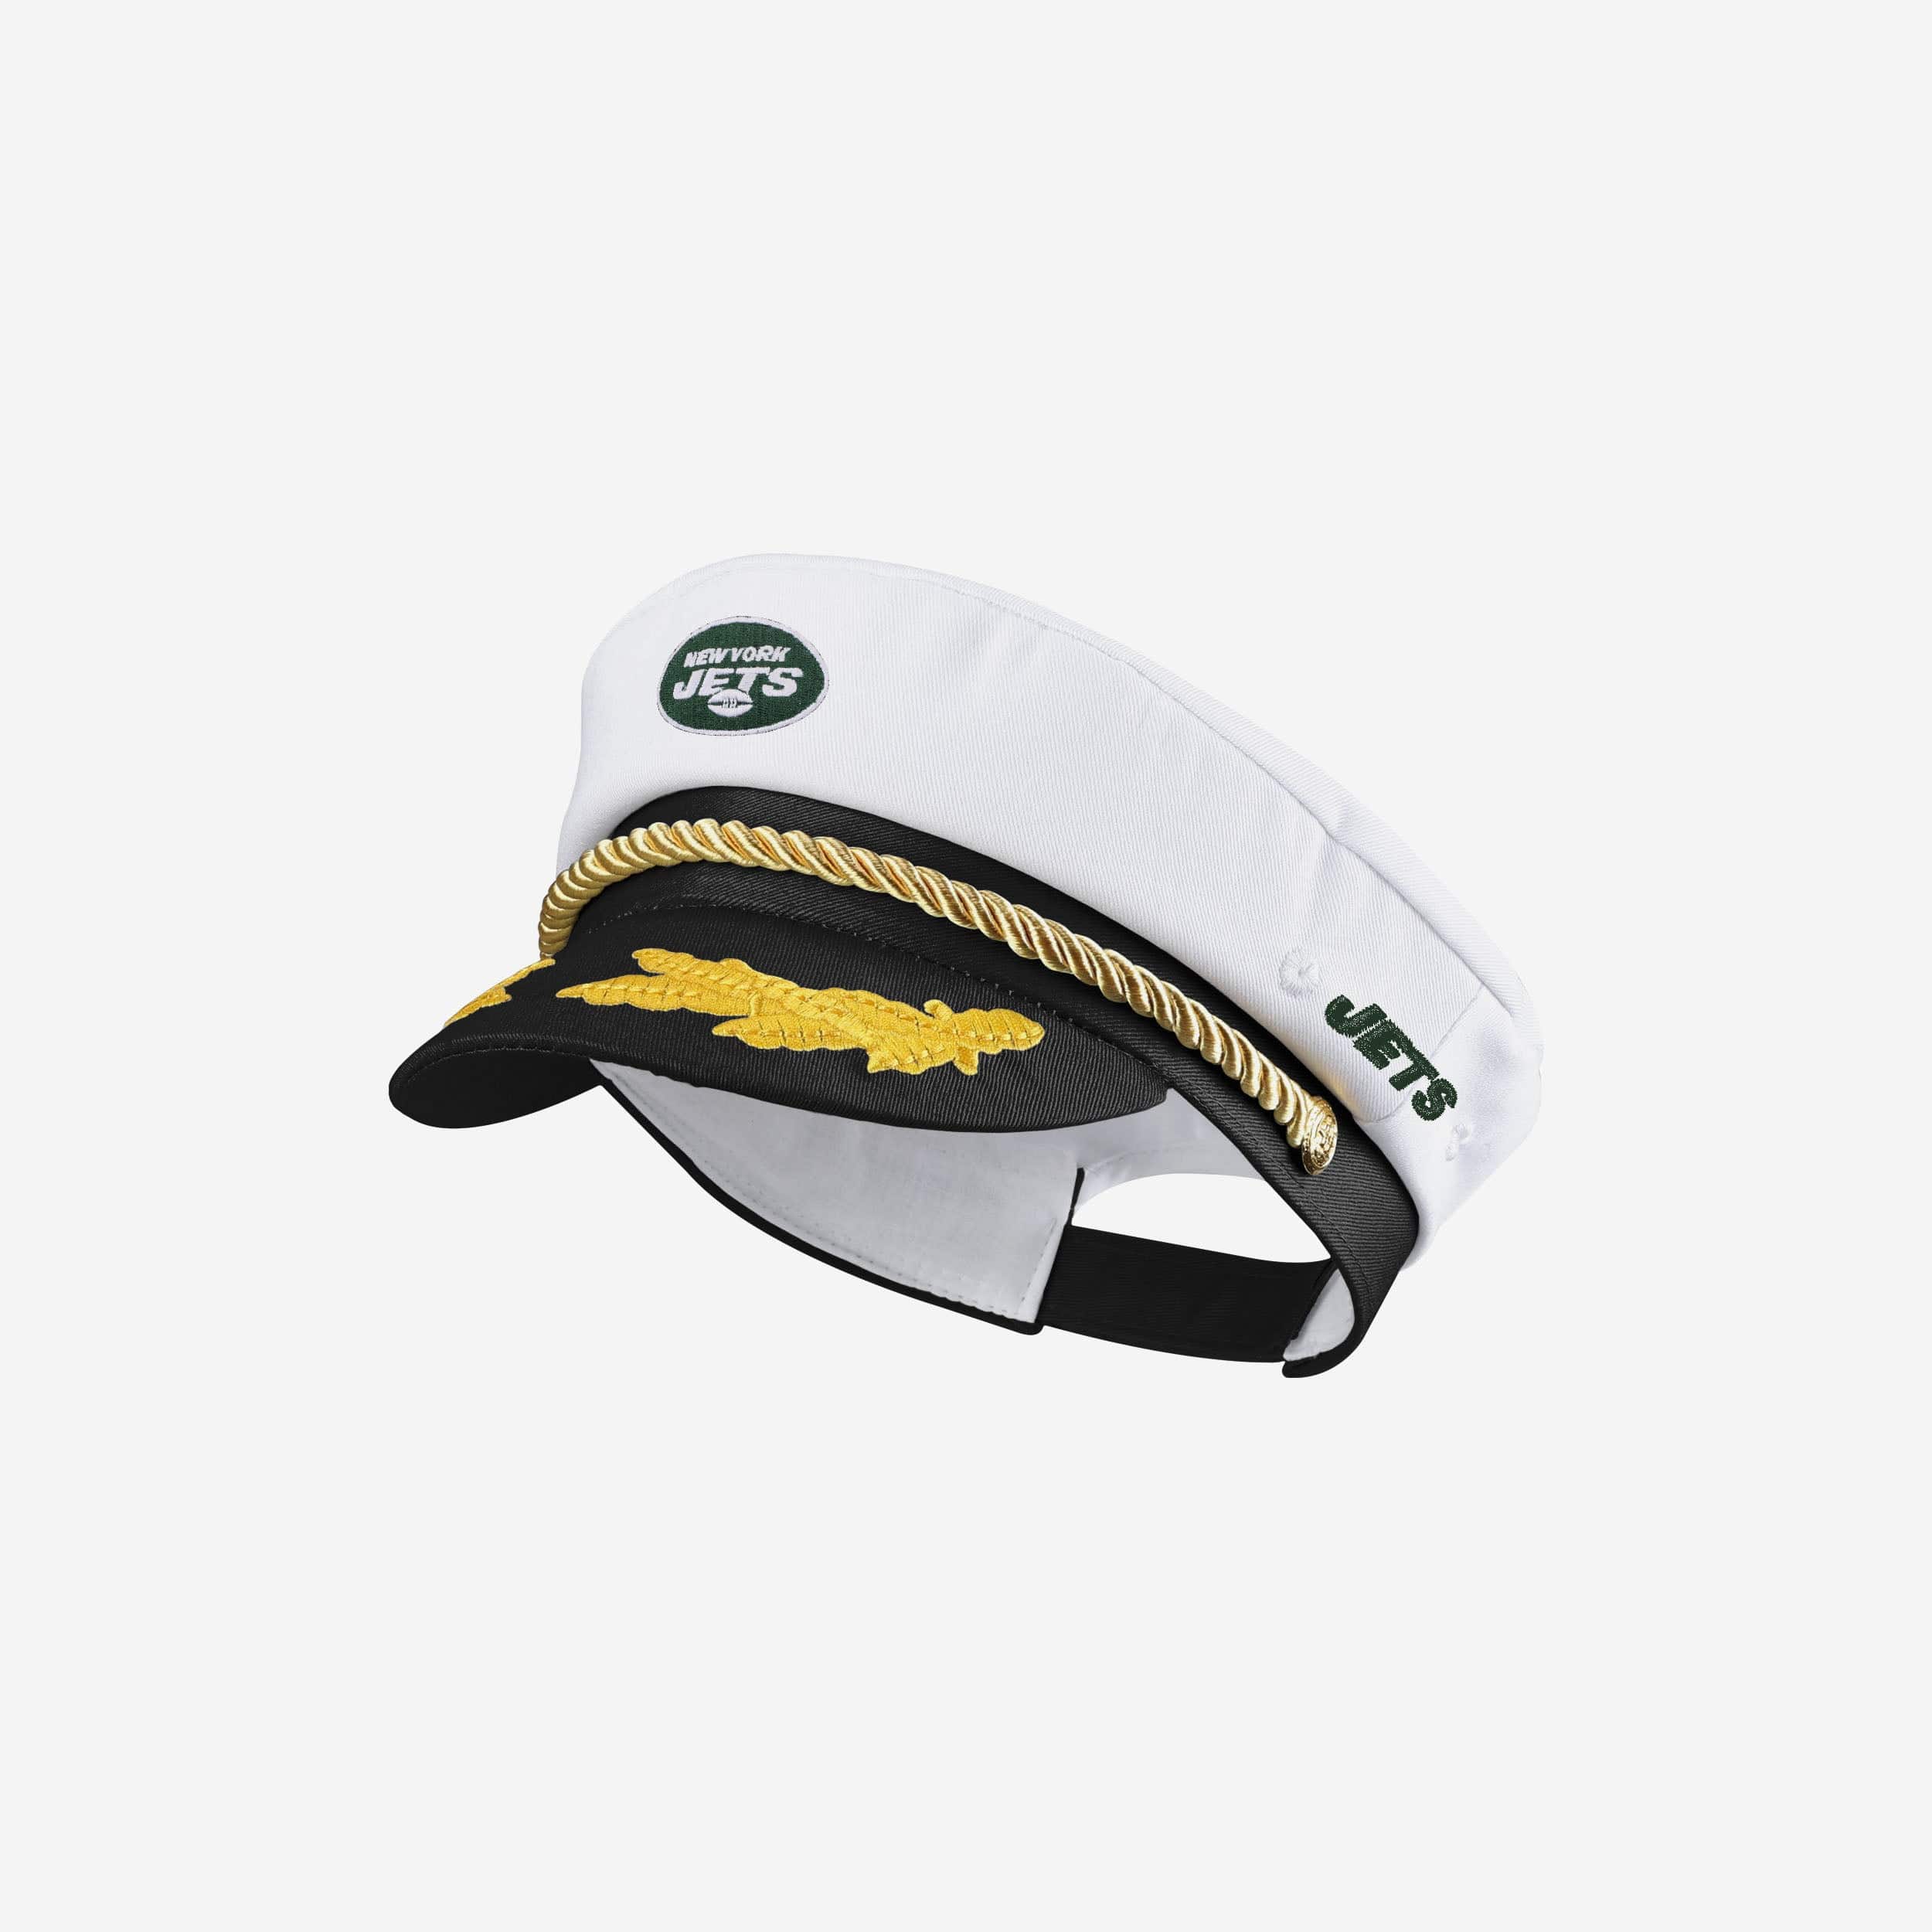 NY JETS NFL APPAREL Adult One Size Hat